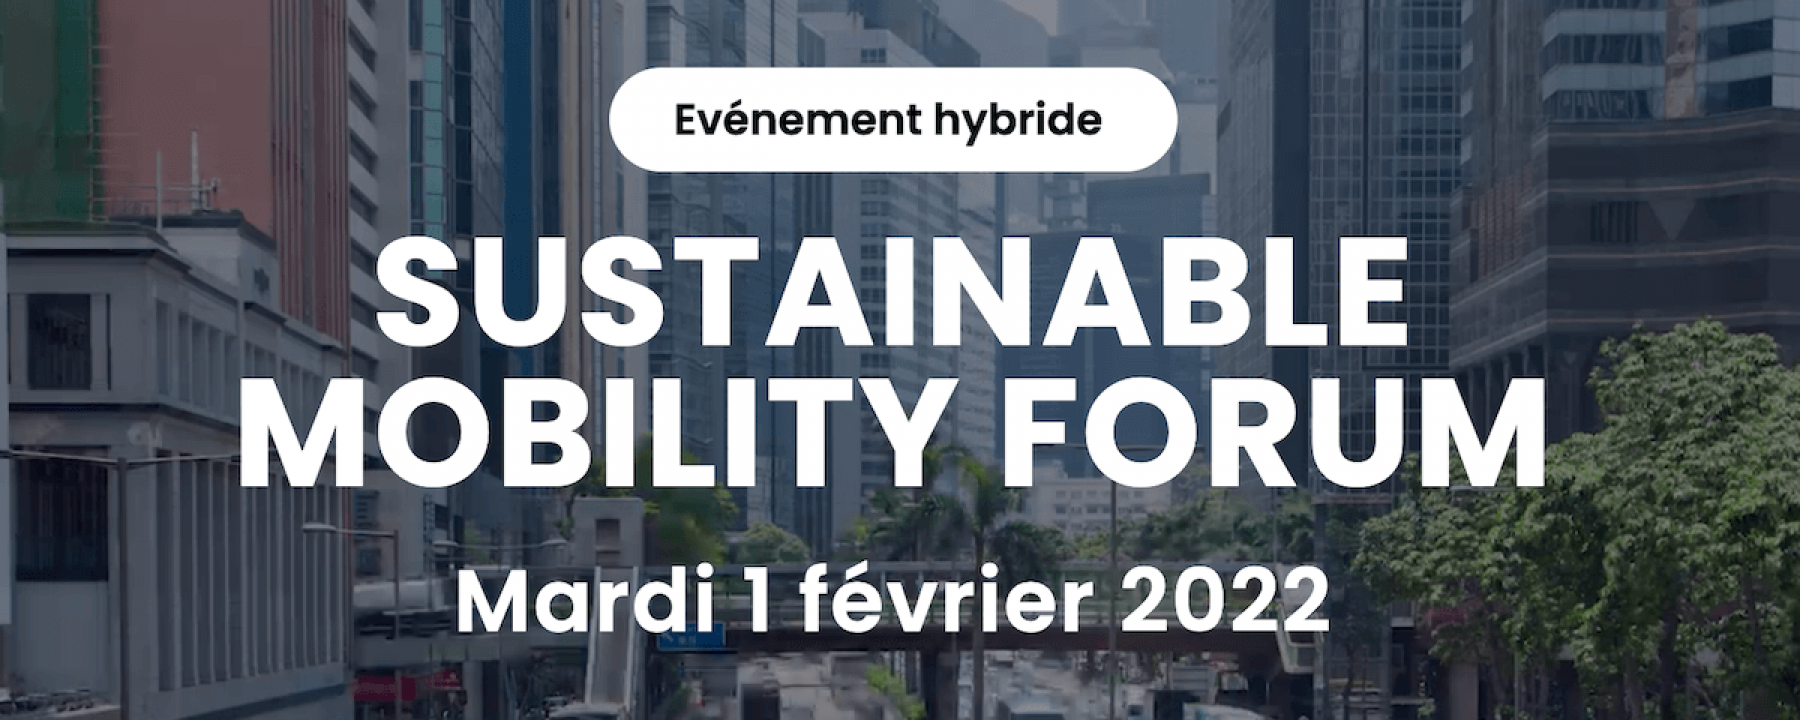 SUSTAINABLE MOBILITY FORUM 2022